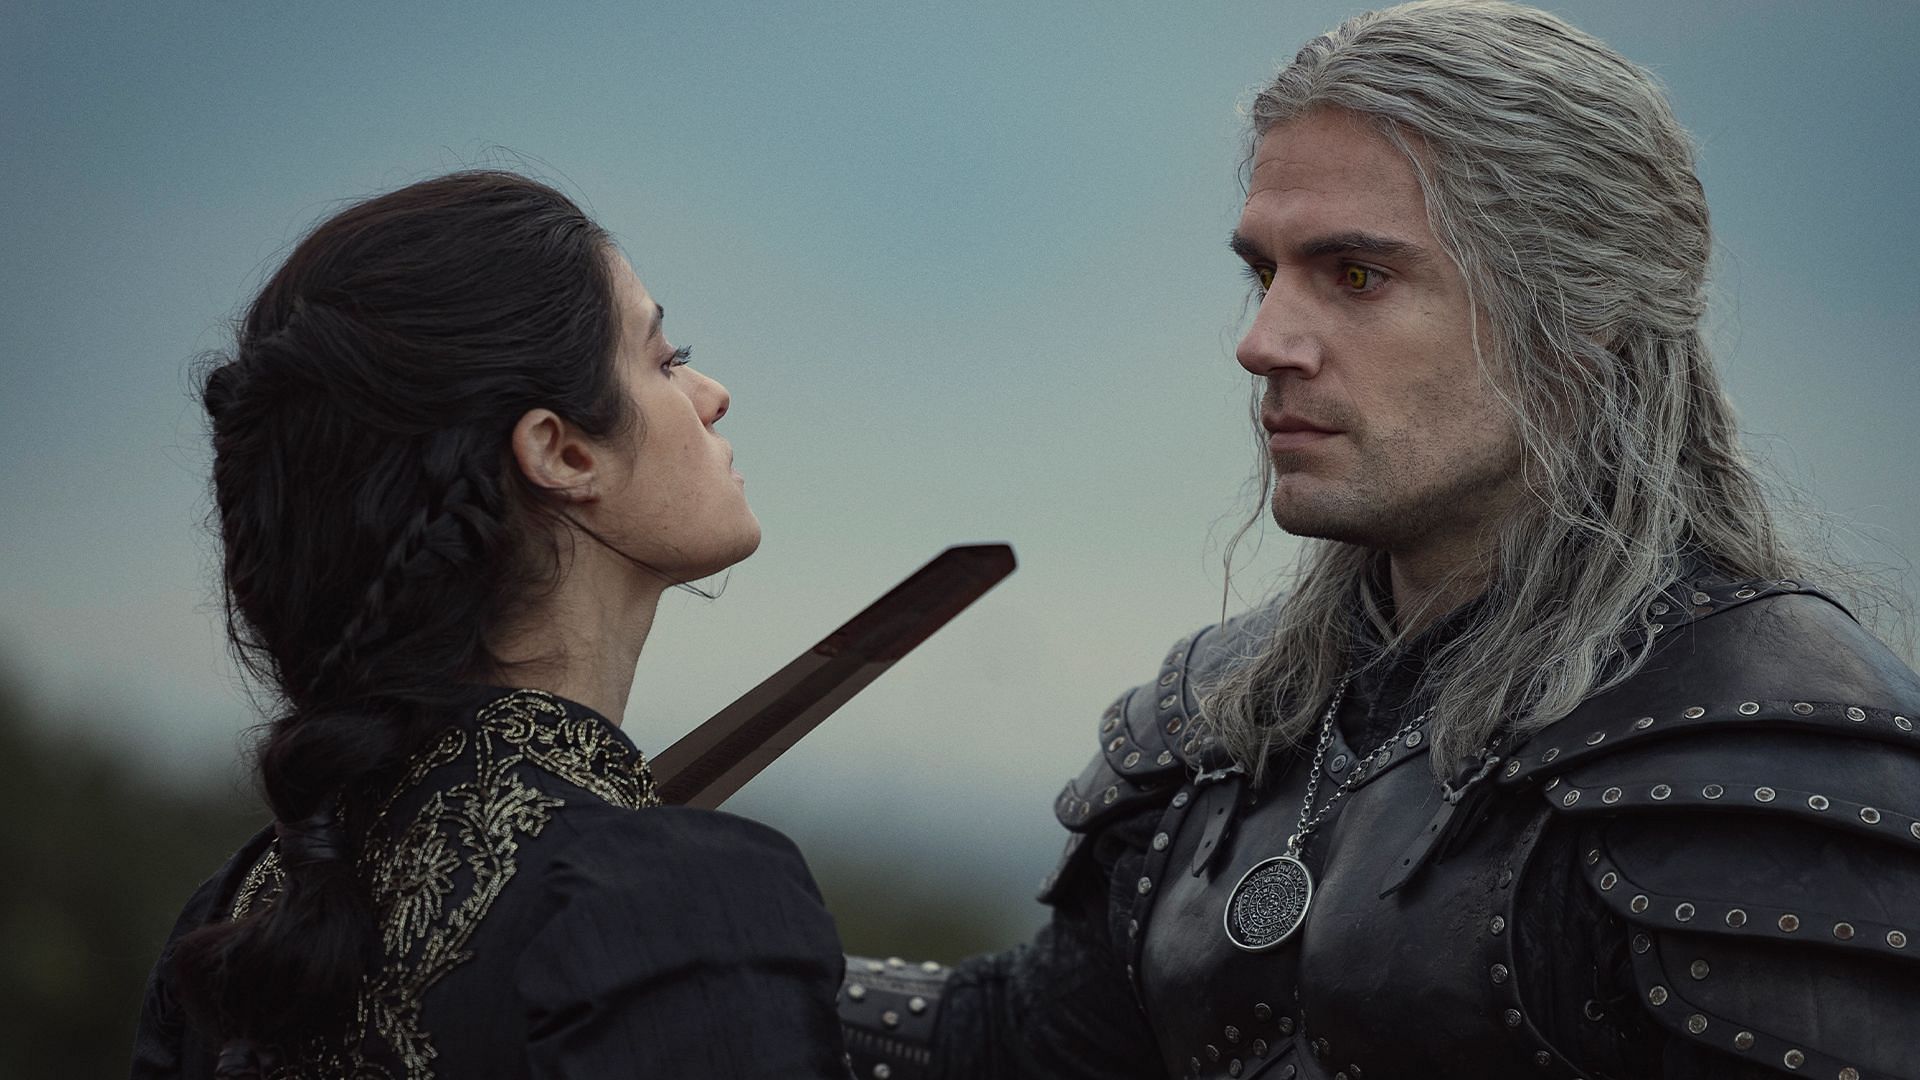 Yennifer and Geralt in The Witcher (Image via Netflix)